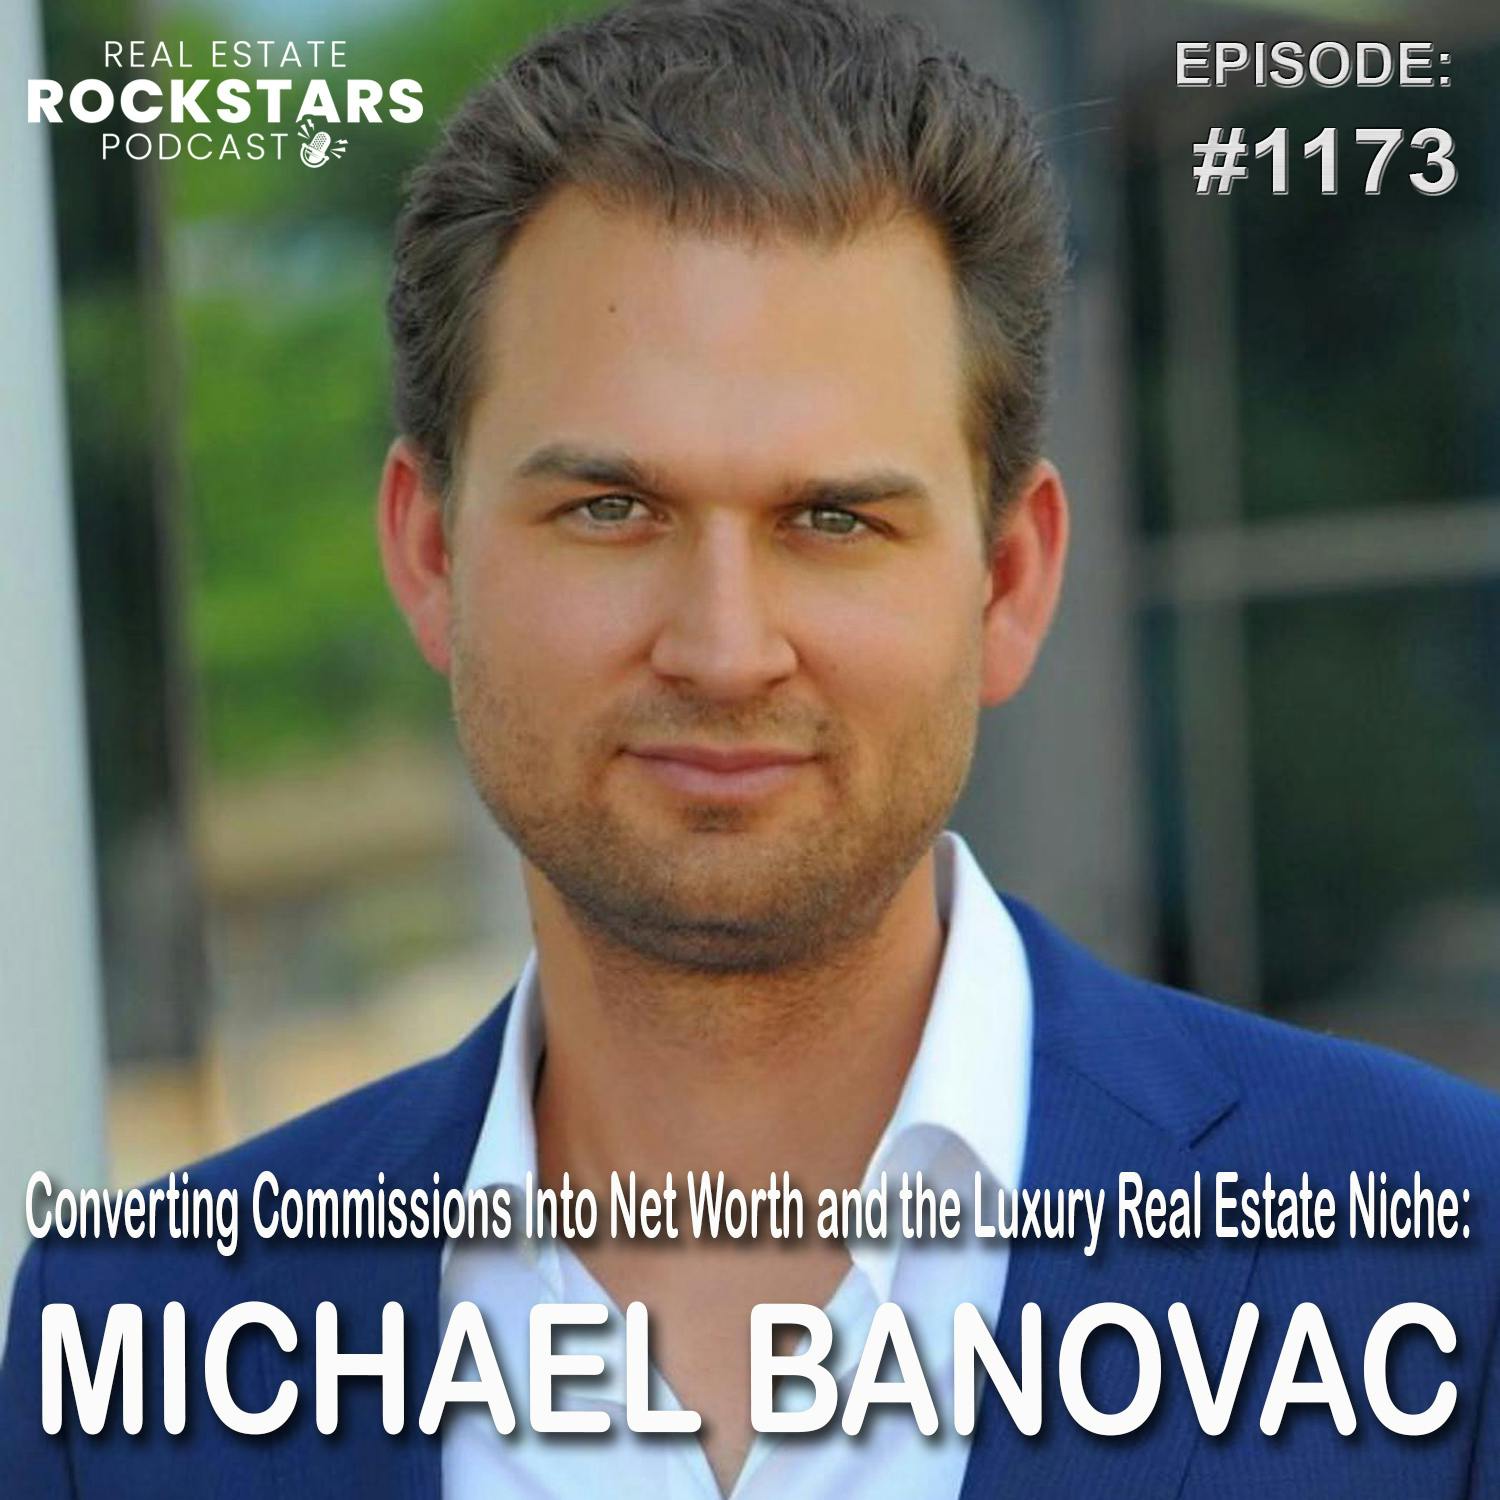 1173: Converting Commissions Into Net Worth and the Luxury Real Estate Niche: Michael Banovac